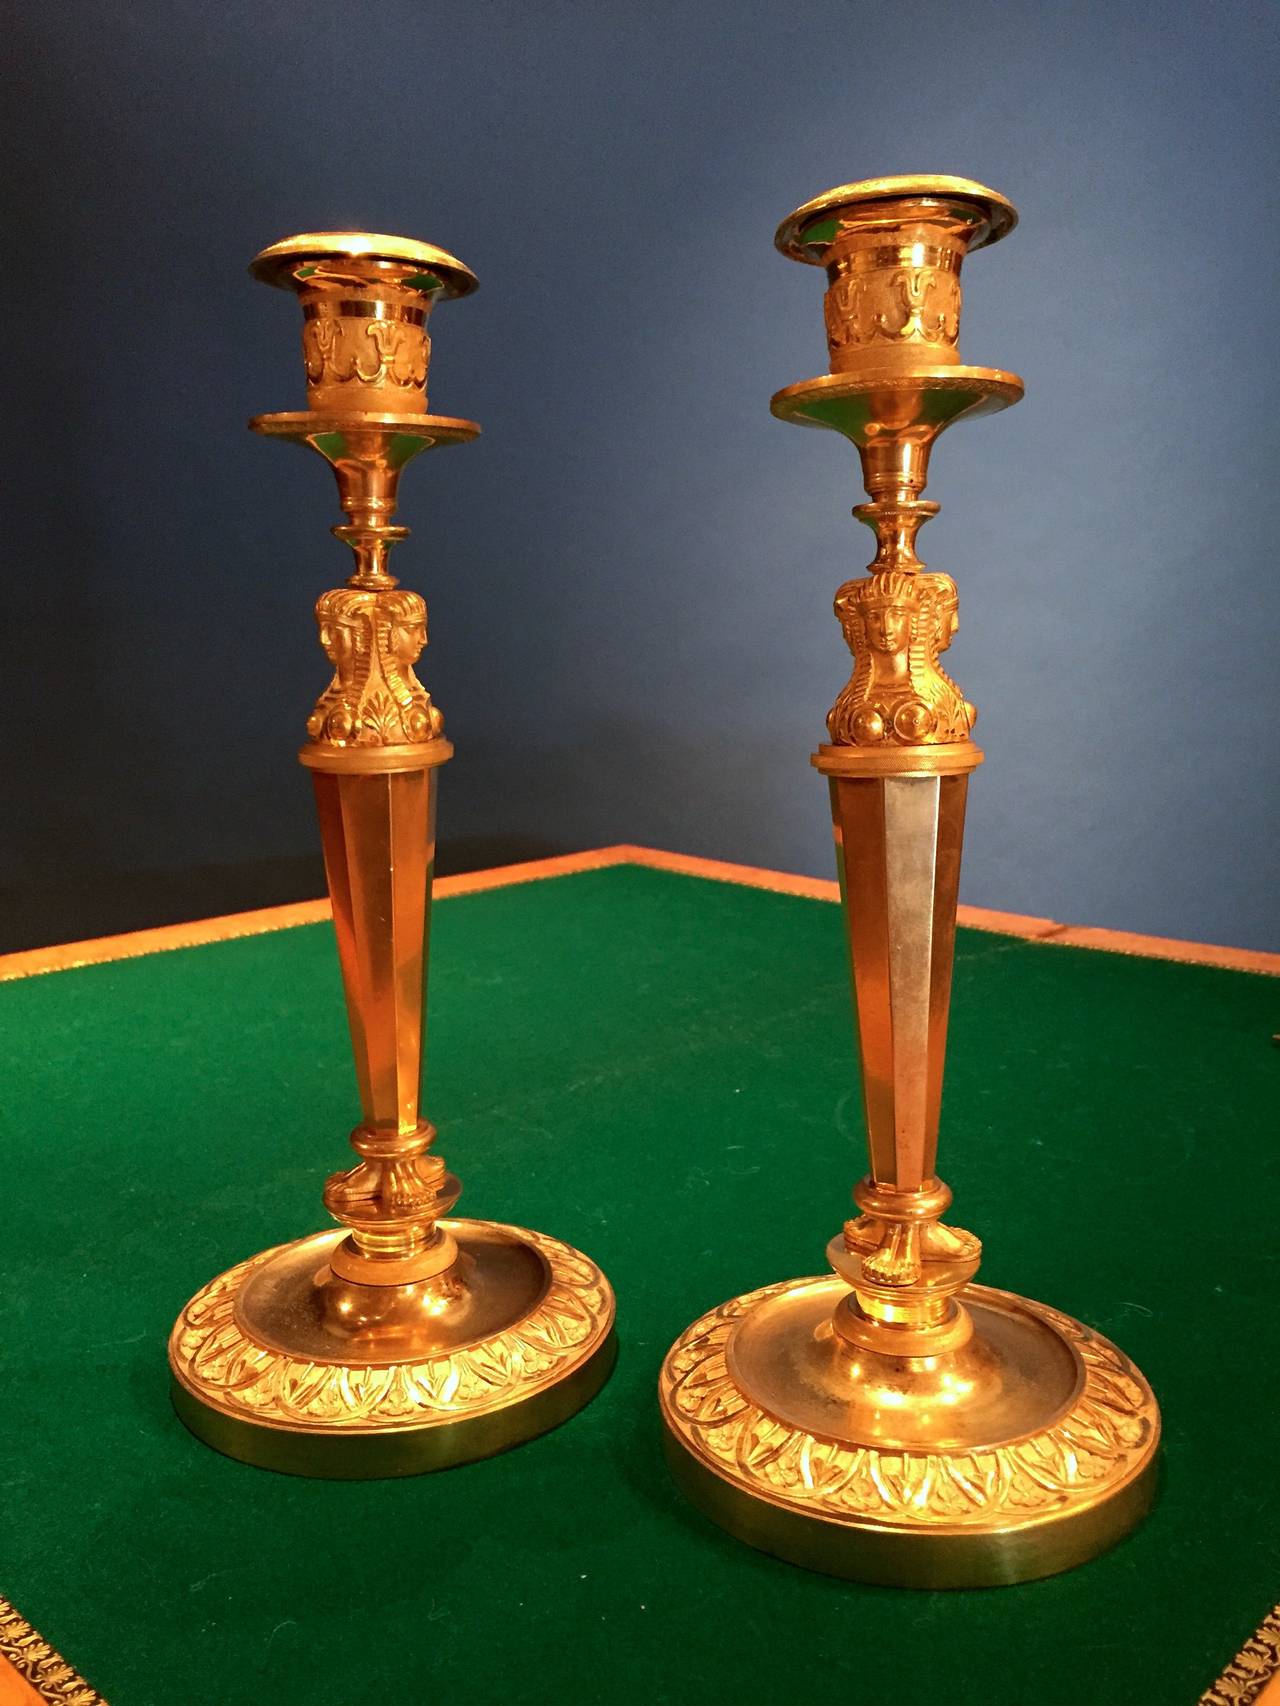 Pair of pharaohs candlesticks, Paris Empire period.

Bronze finely carved and gilded, the six drums matte gilt-framed supporting three female heads capped Nemes (headdress of the pharaohs) and ending with three pairs of bare feet.
The binets,